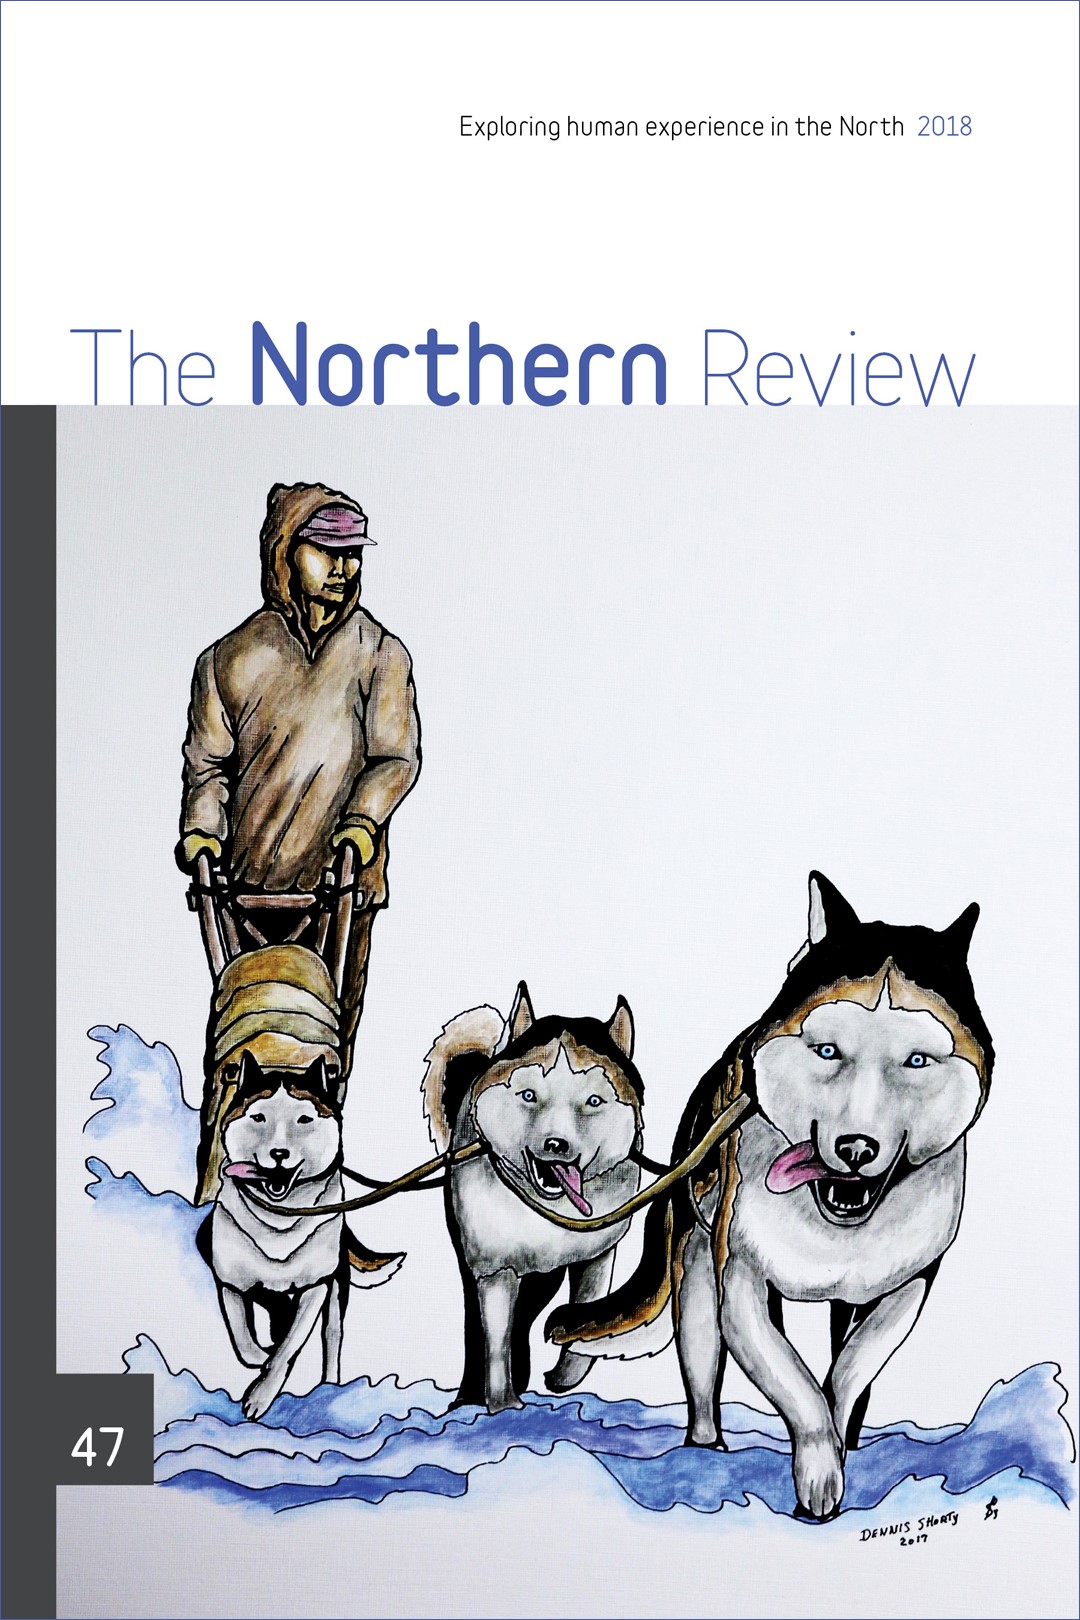 The Northern Review 47 Cover painting My dad and our dog team by Dennis Shorty